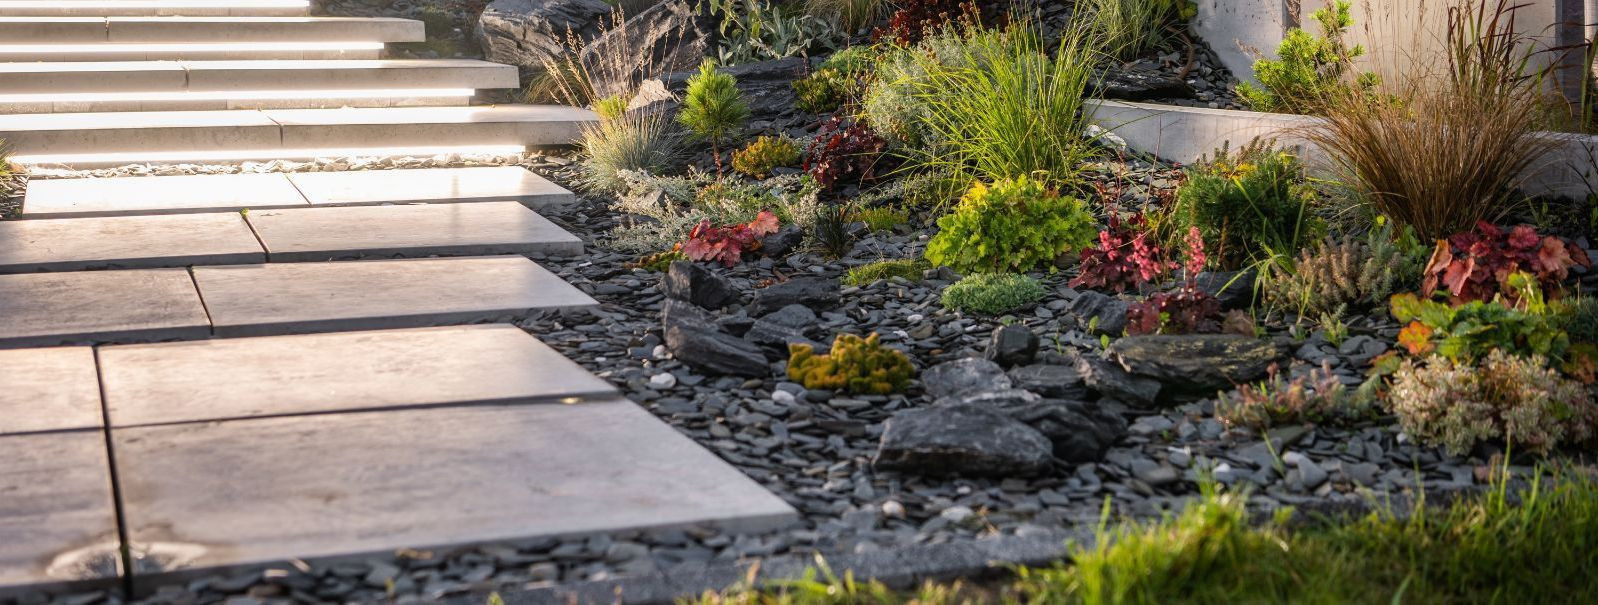 Stone site construction is an ancient art that has been modernized to enhance contemporary landscapes. It involves the meticulous selection, shaping, and placem